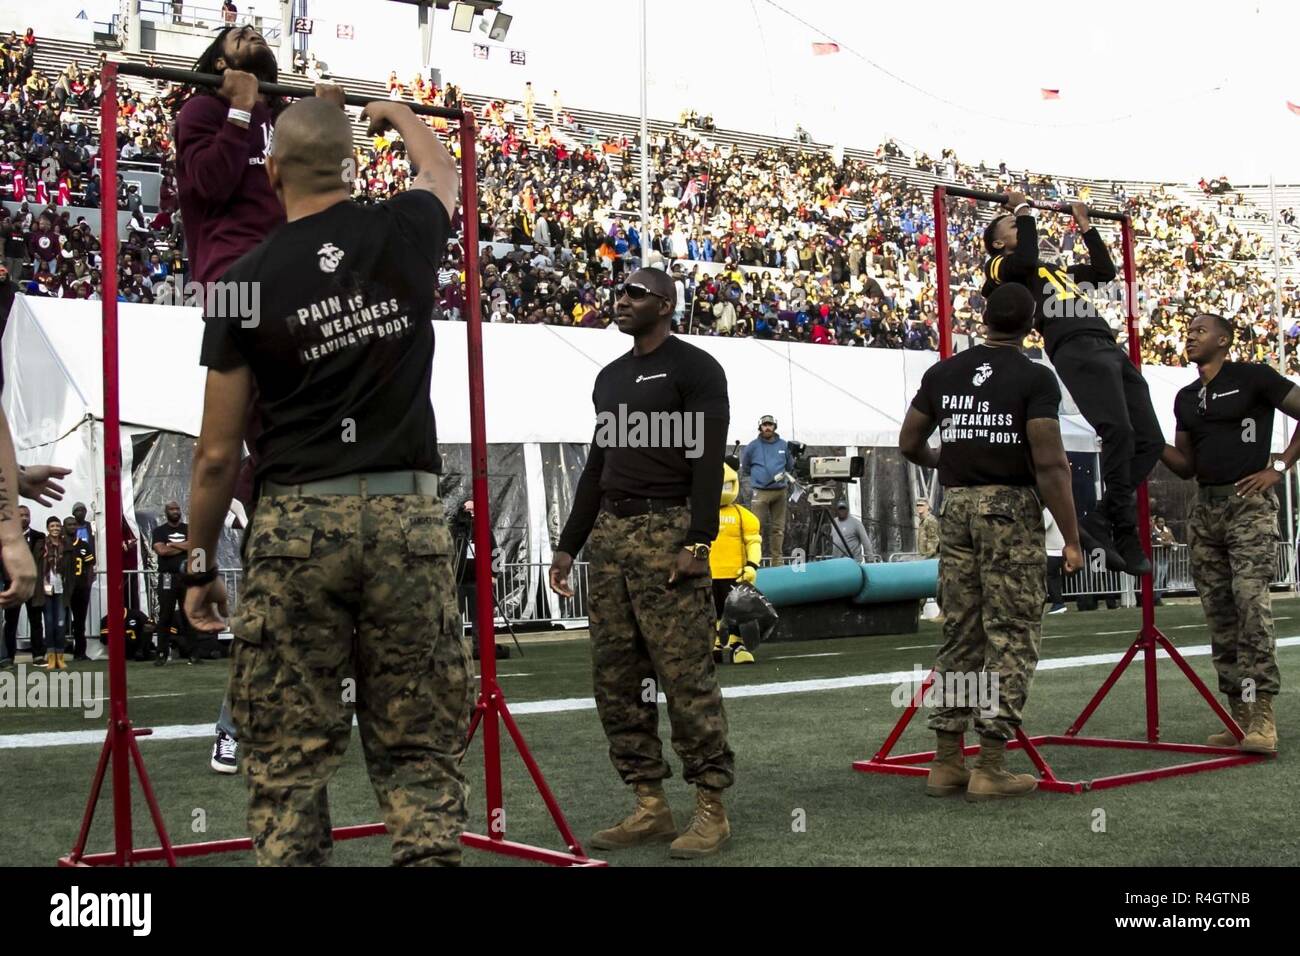 Event attendees from both Alabama A&M University and Alabama State University compete against each other in a Marine Corps pull-up challenge during the Magic City Classic, a 77-year-old college football rivalry between the two largest historically black universities in Alabama, in Birmingham, Oct. 27, 2018. The Marine Corps participates in the Magic City Classic to foster a positive relationship with the community and illustrate a parallel between the indelible fighting spirit of the Marines and the athletes who compete in the classic. Stock Photo